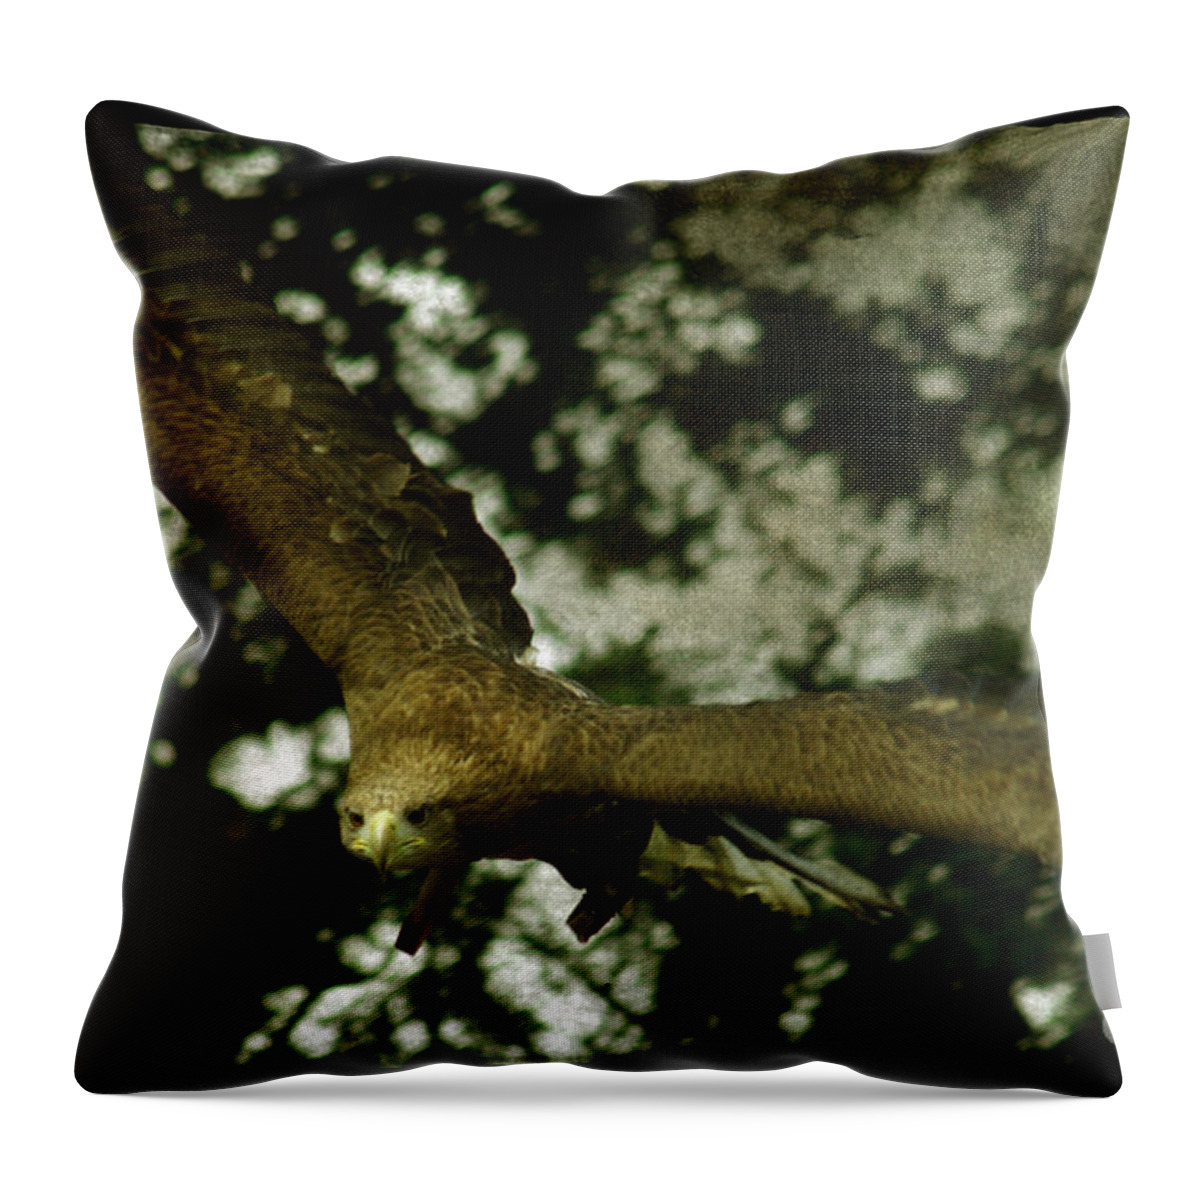 Eagle Throw Pillow featuring the photograph Bird Of Prey by Ang El